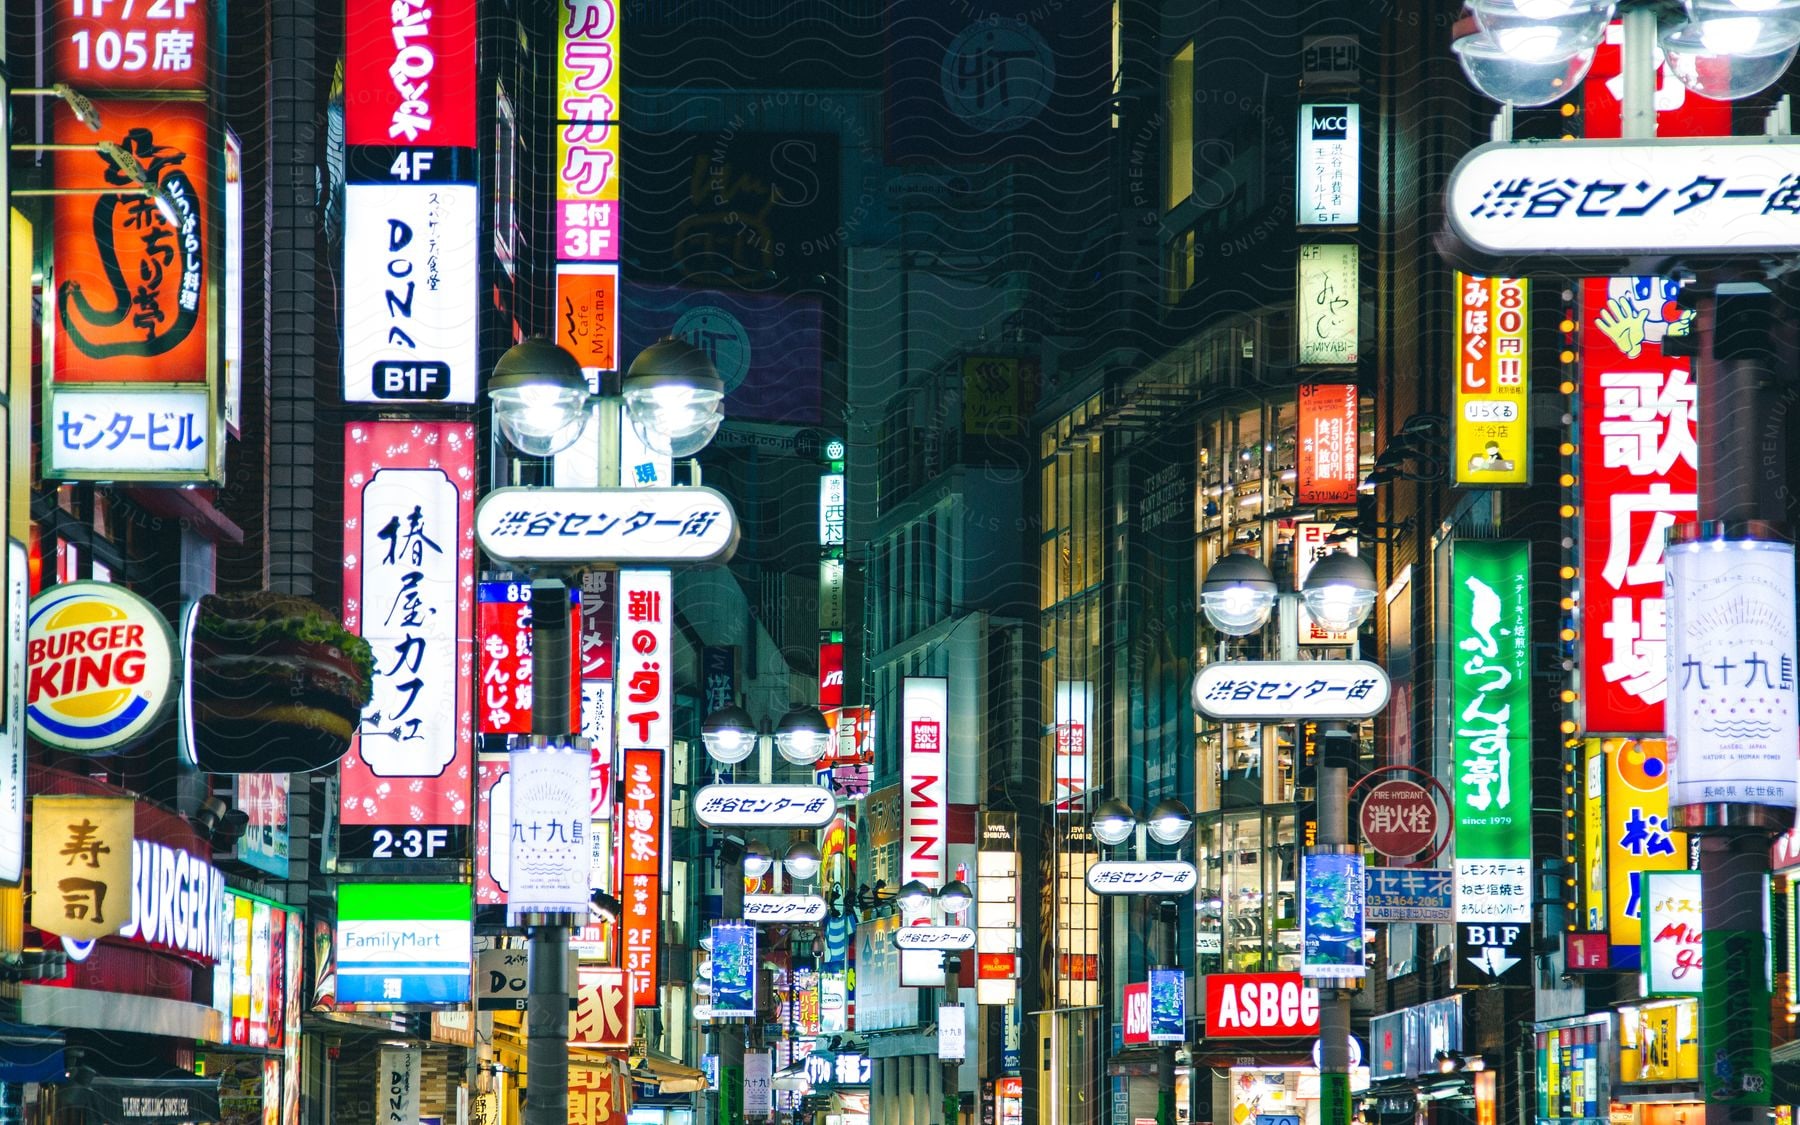 Colorful shop signs on a busy city street at night in japan